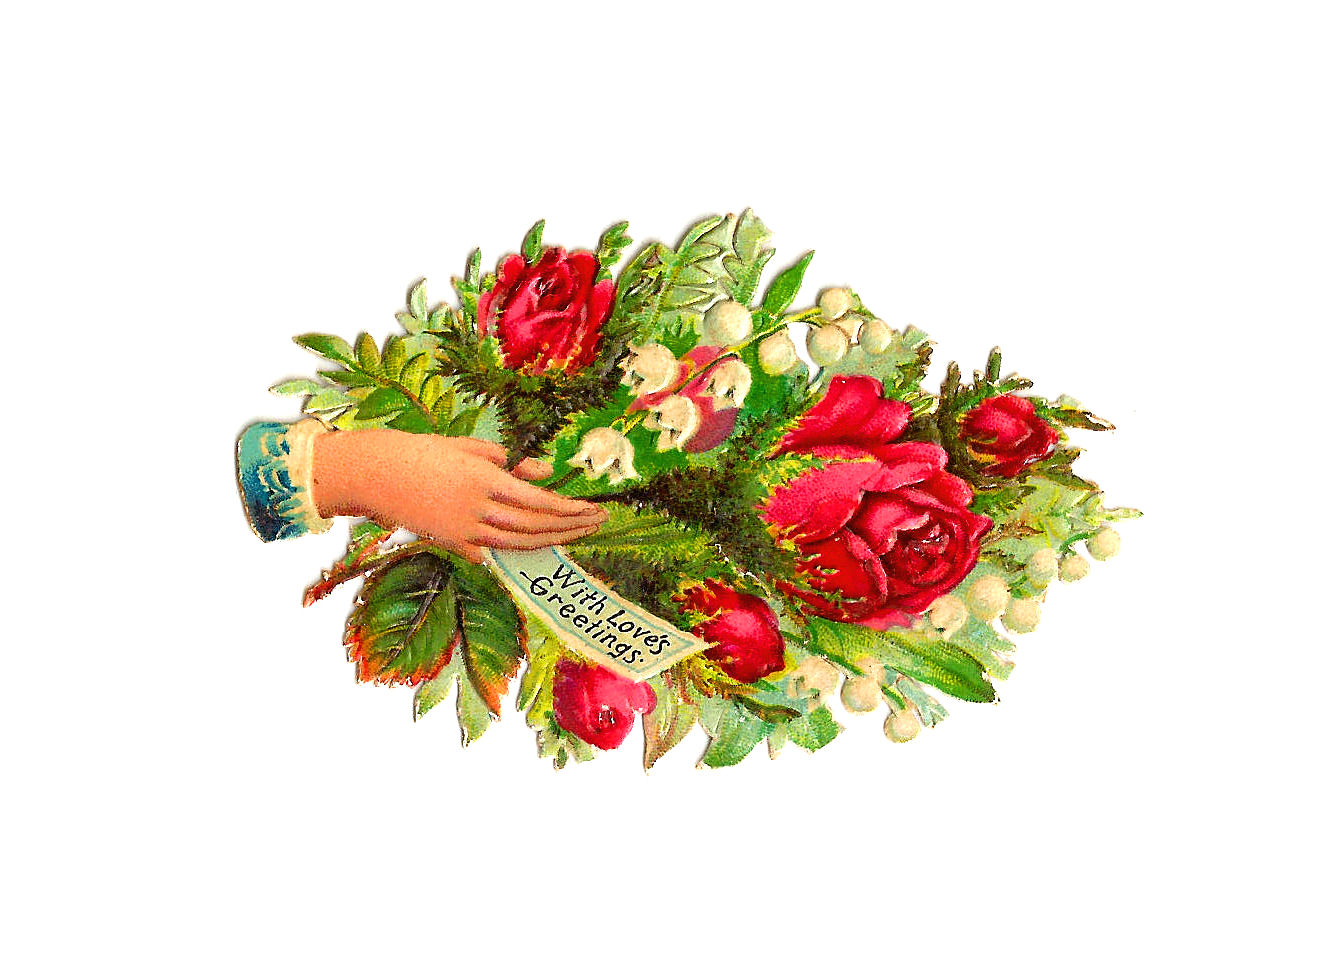 Red Rose Bouquet Clipart Free 26 Amazing Cliparts Rrbcf